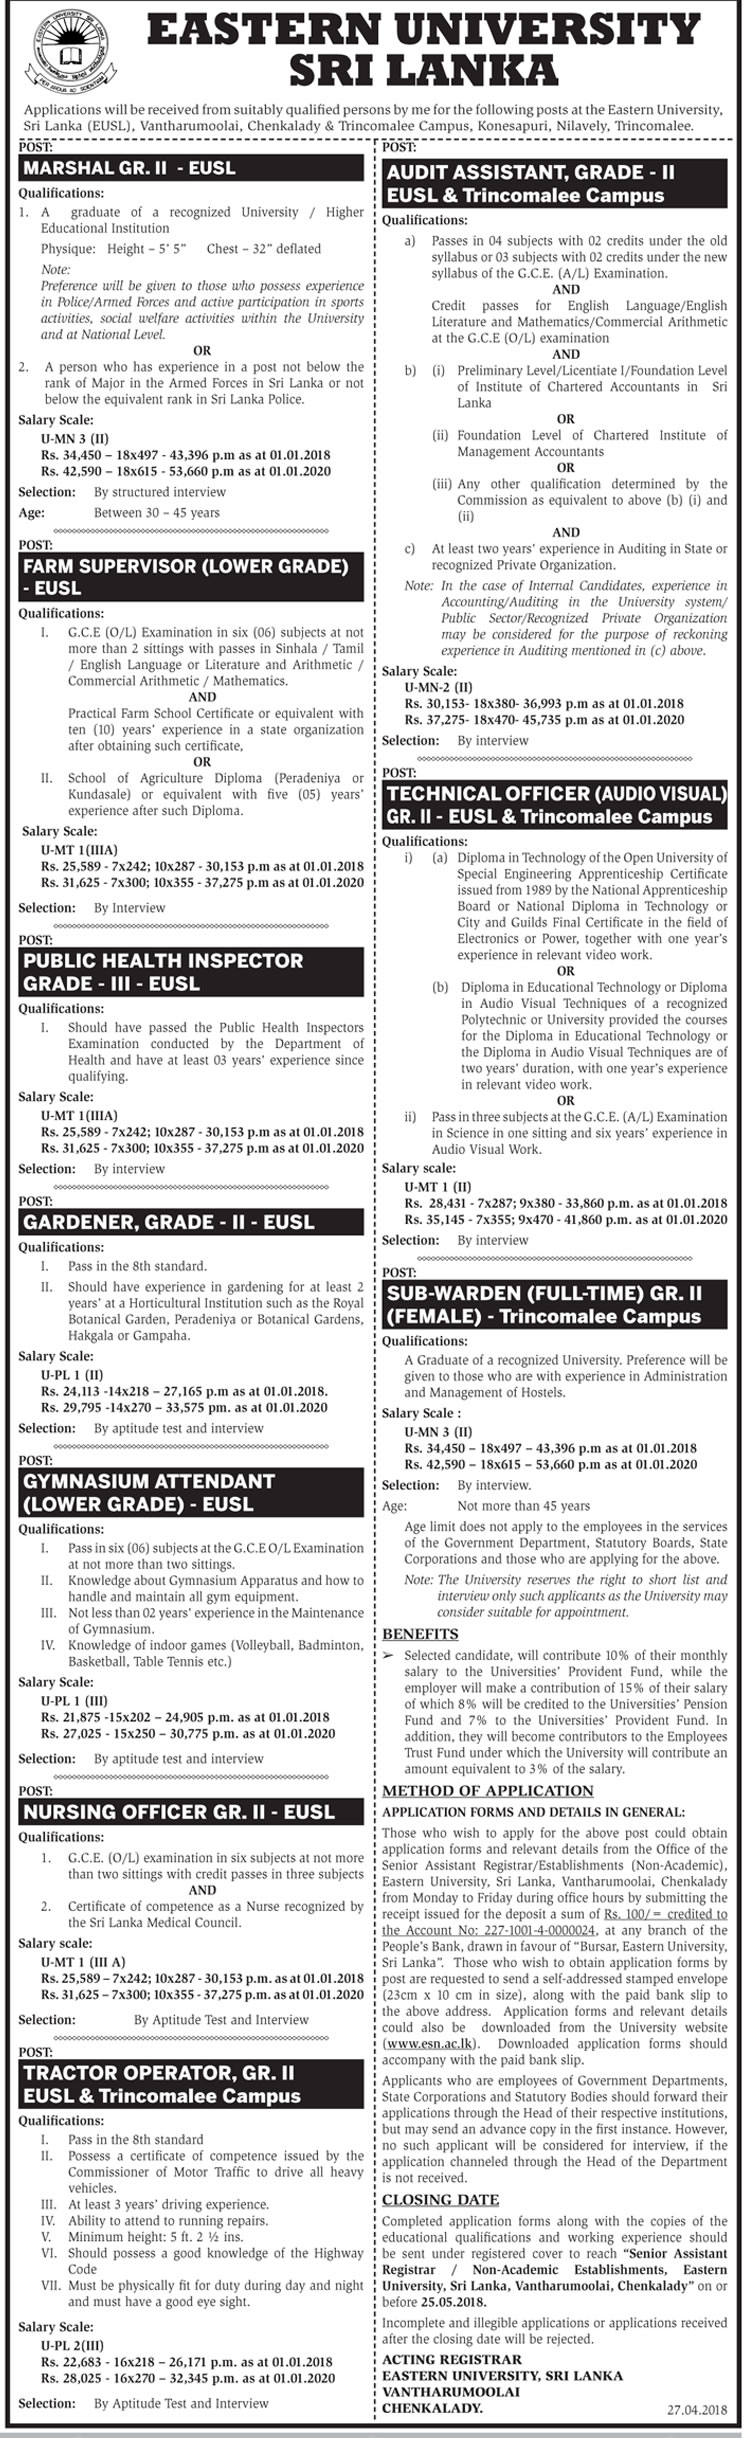 Audit Assistant / Technical Officer / Sub Warden - Eastern University